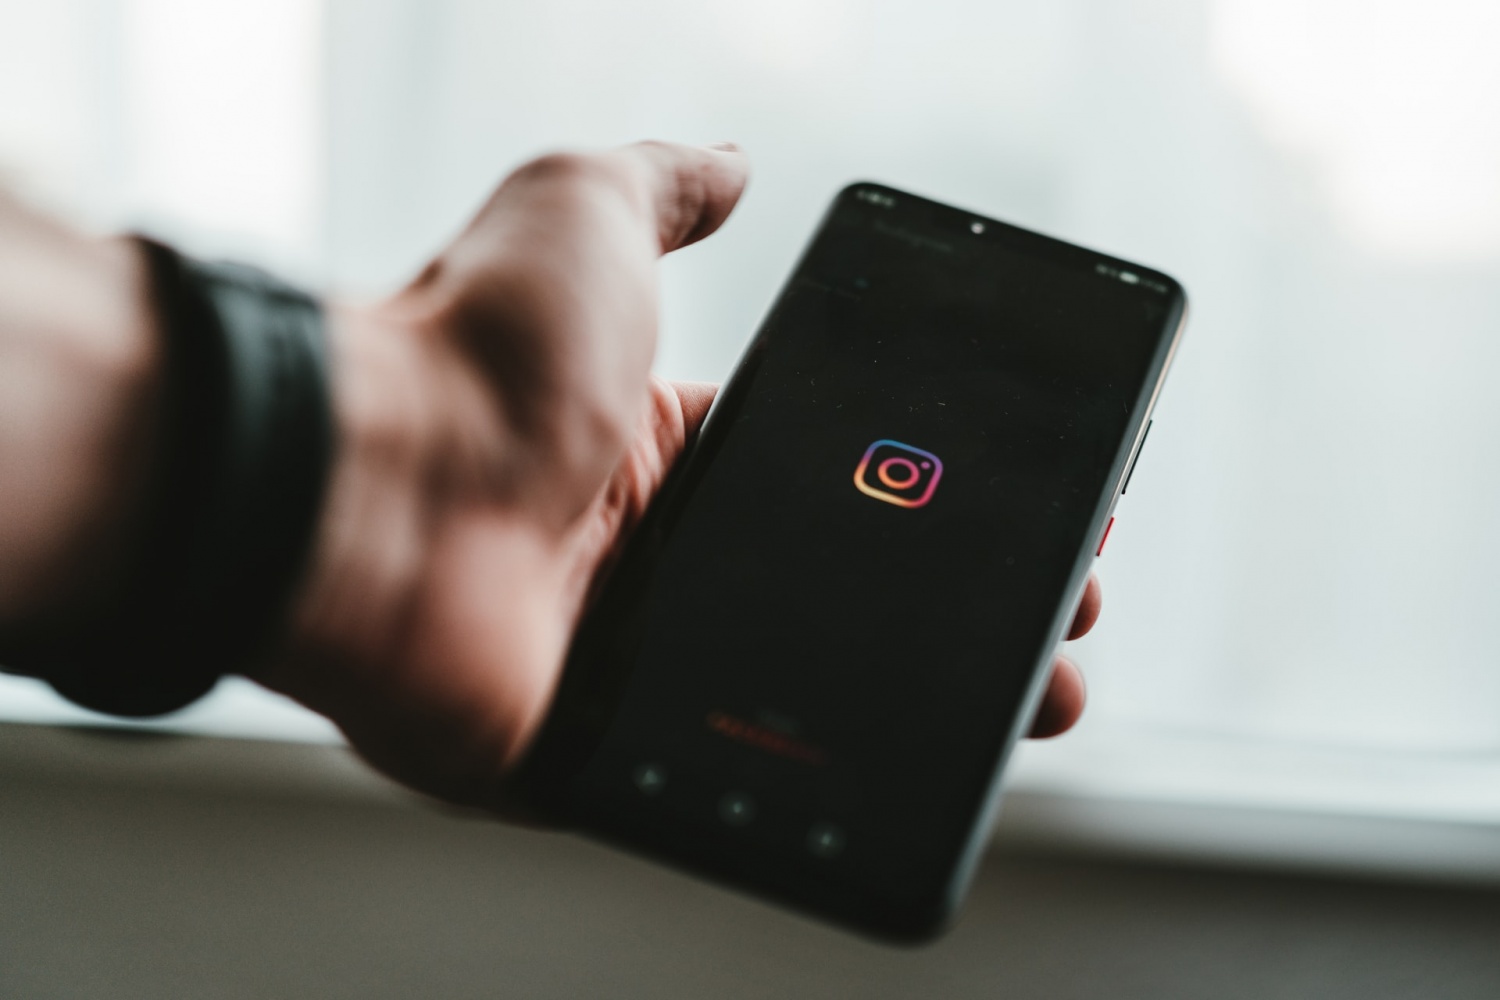 Instagram Update Allows Users to Reply to Messages Without Opening DMs and More